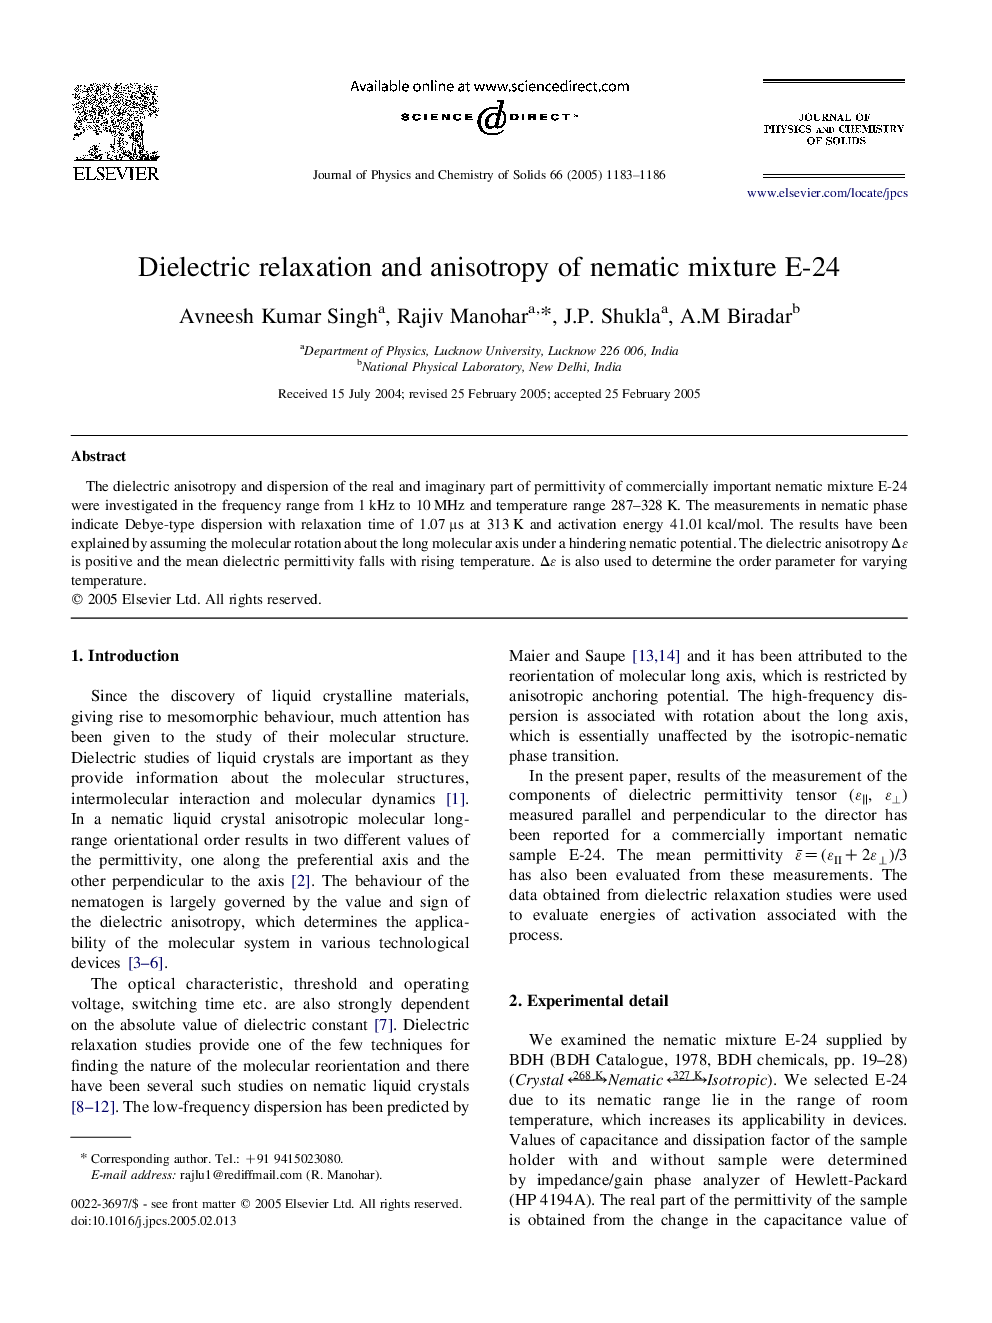 Dielectric relaxation and anisotropy of nematic mixture E-24